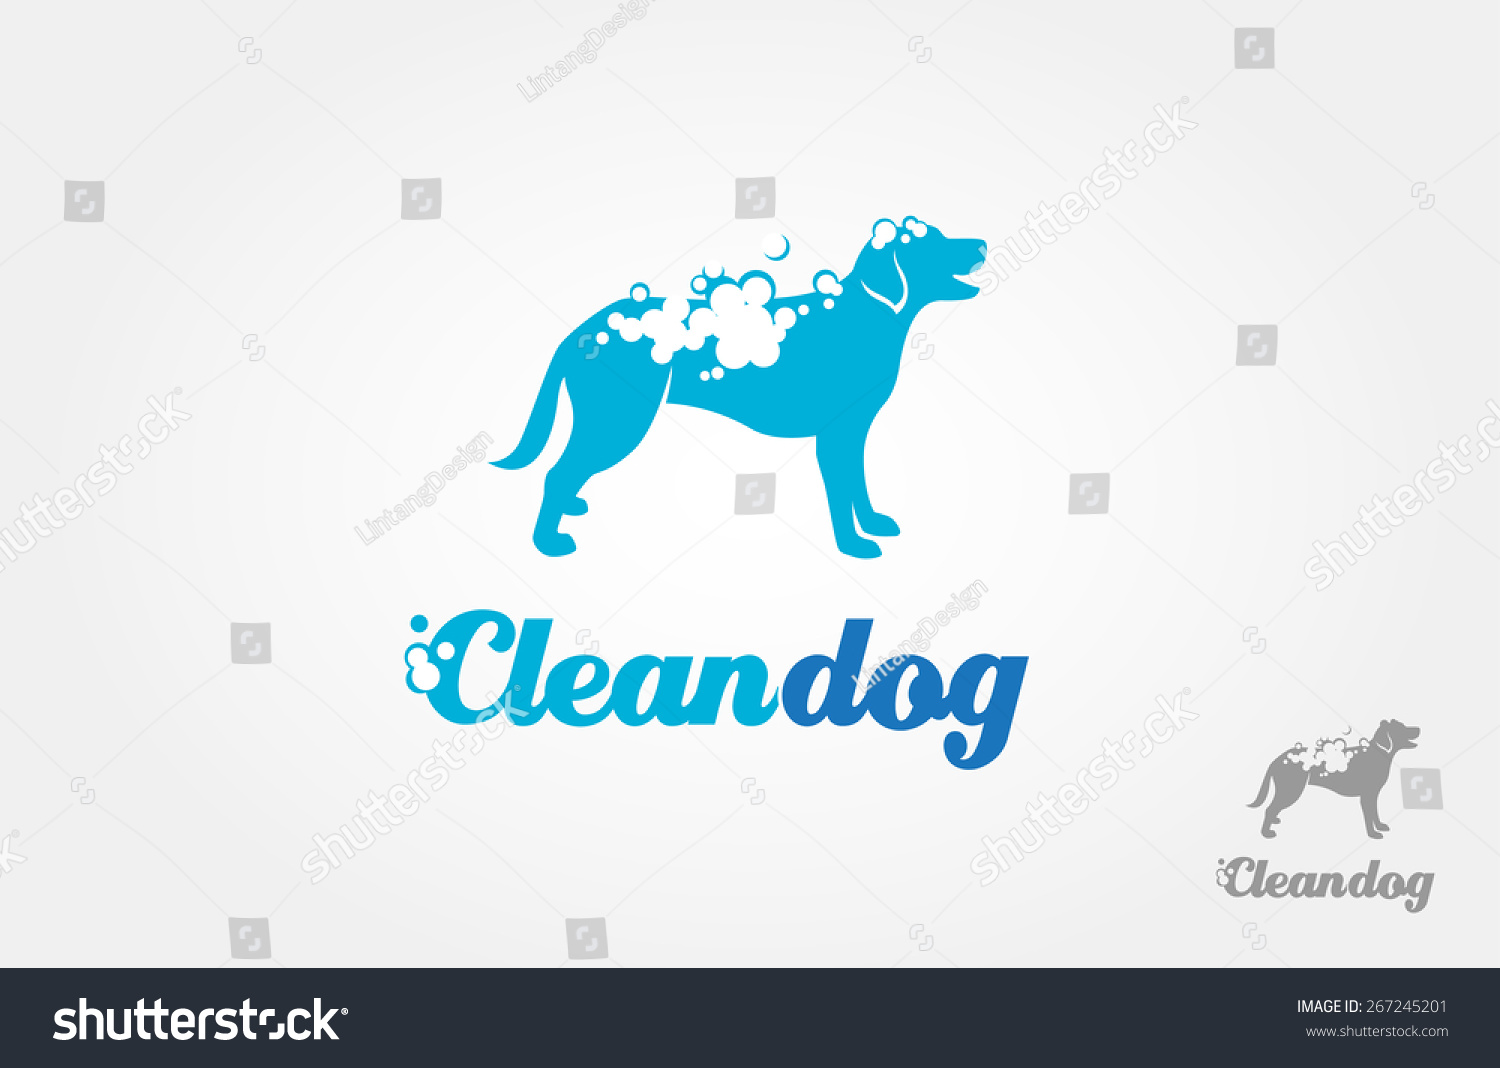 SVG of Clean Dog Vector Logo. It's a silhouette of the dog logo, with foam on the body, it's look like bathing. This image good for pet washing, pet care, and others that related with pet or dog services. svg